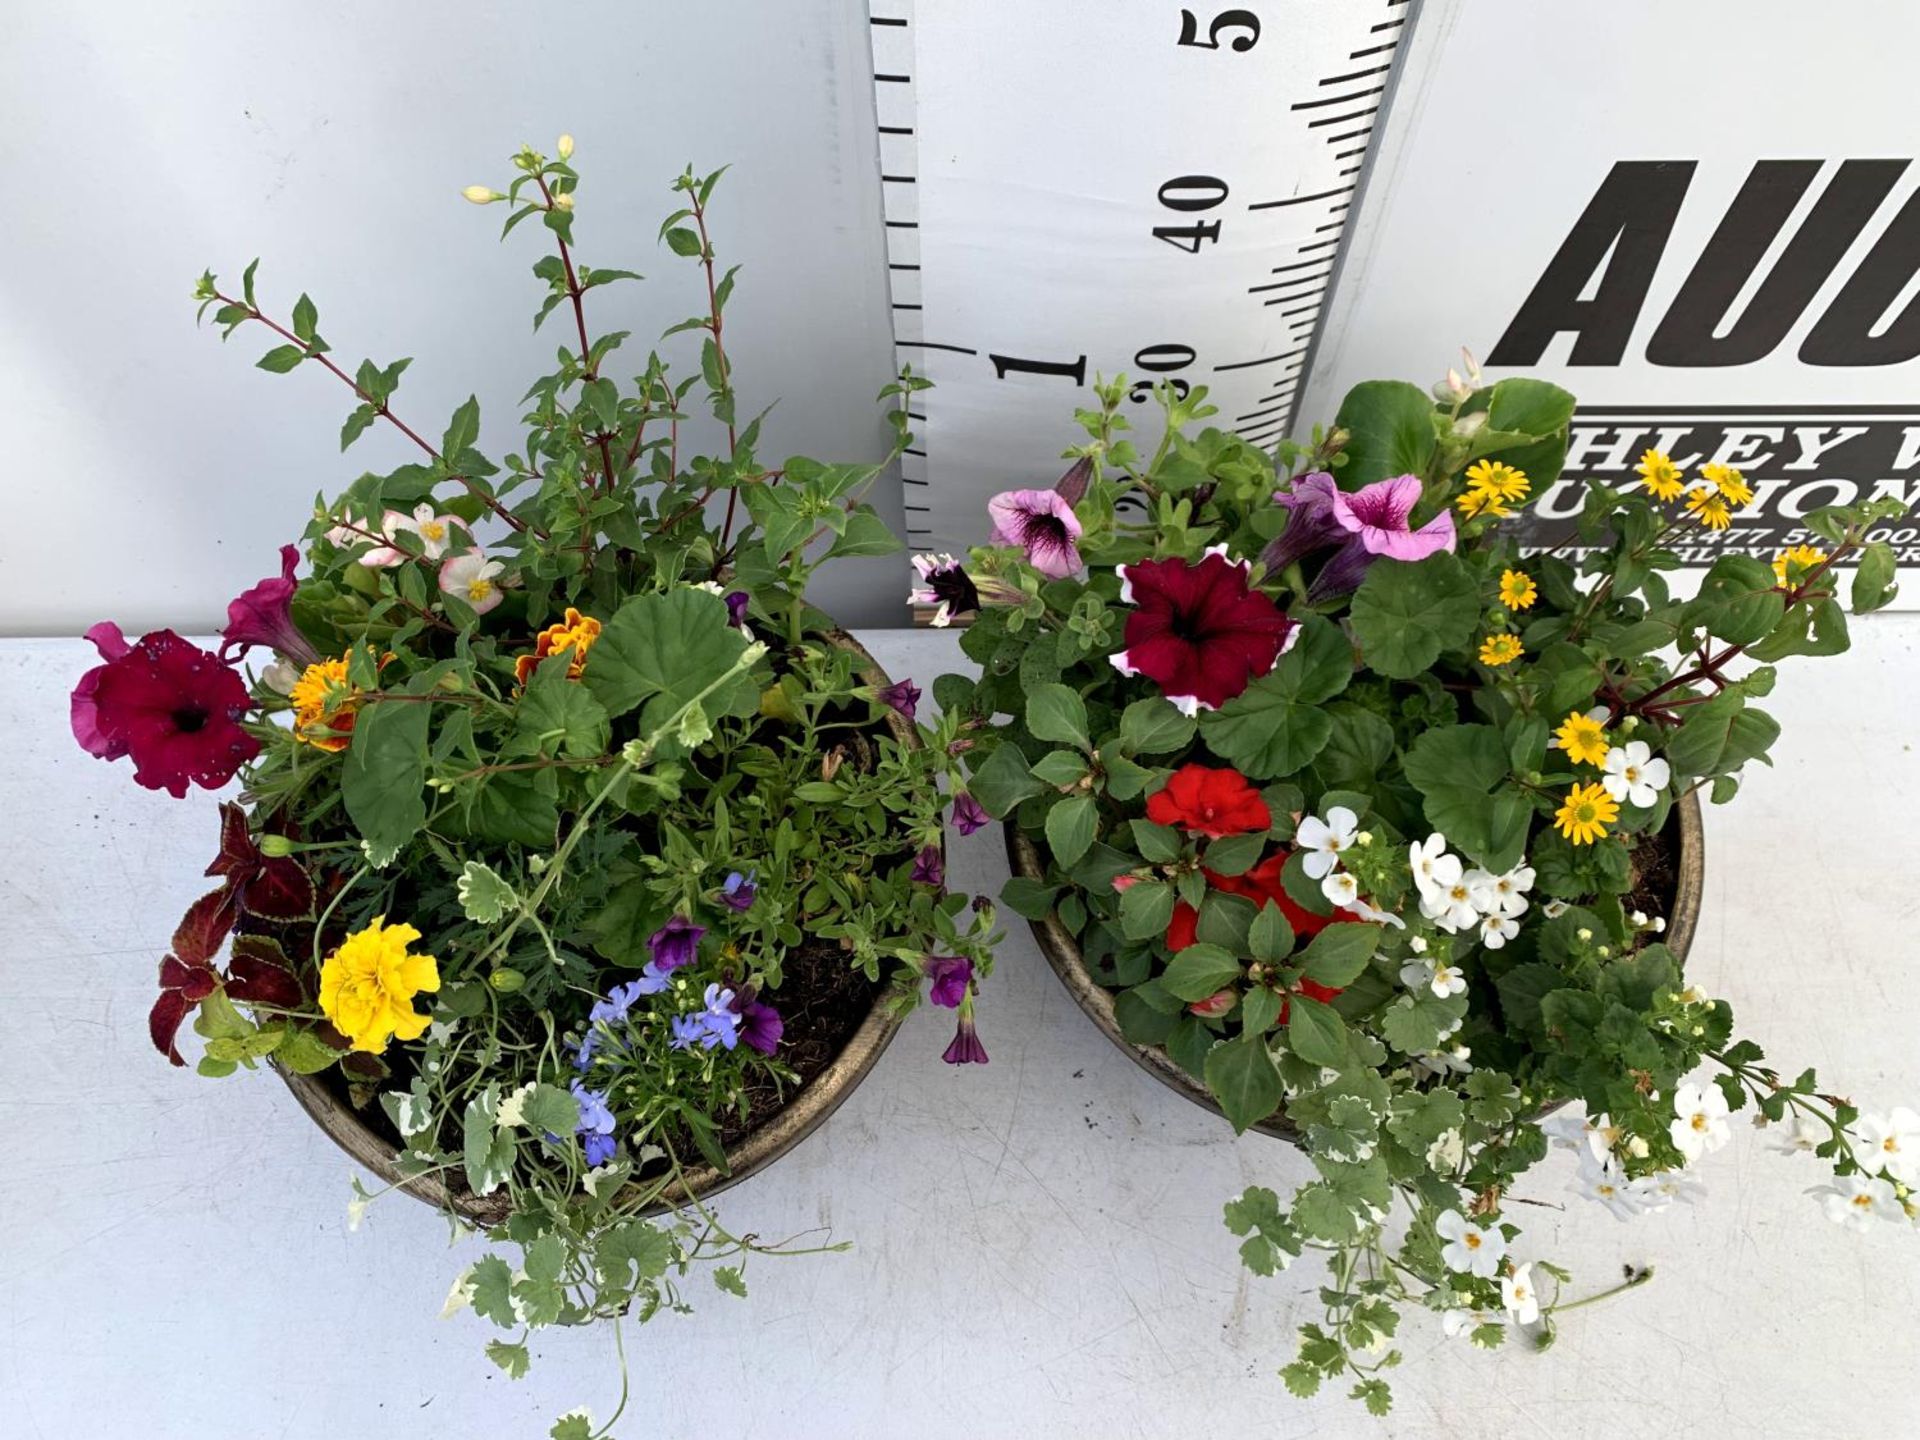 TWO LARGE TUBS PLANTED WITH VARIOUS PLANTS INC MARIGOLDS PETUNIAS FUCHSIA BACOPA ETC IN 10 LTR - Image 3 of 8